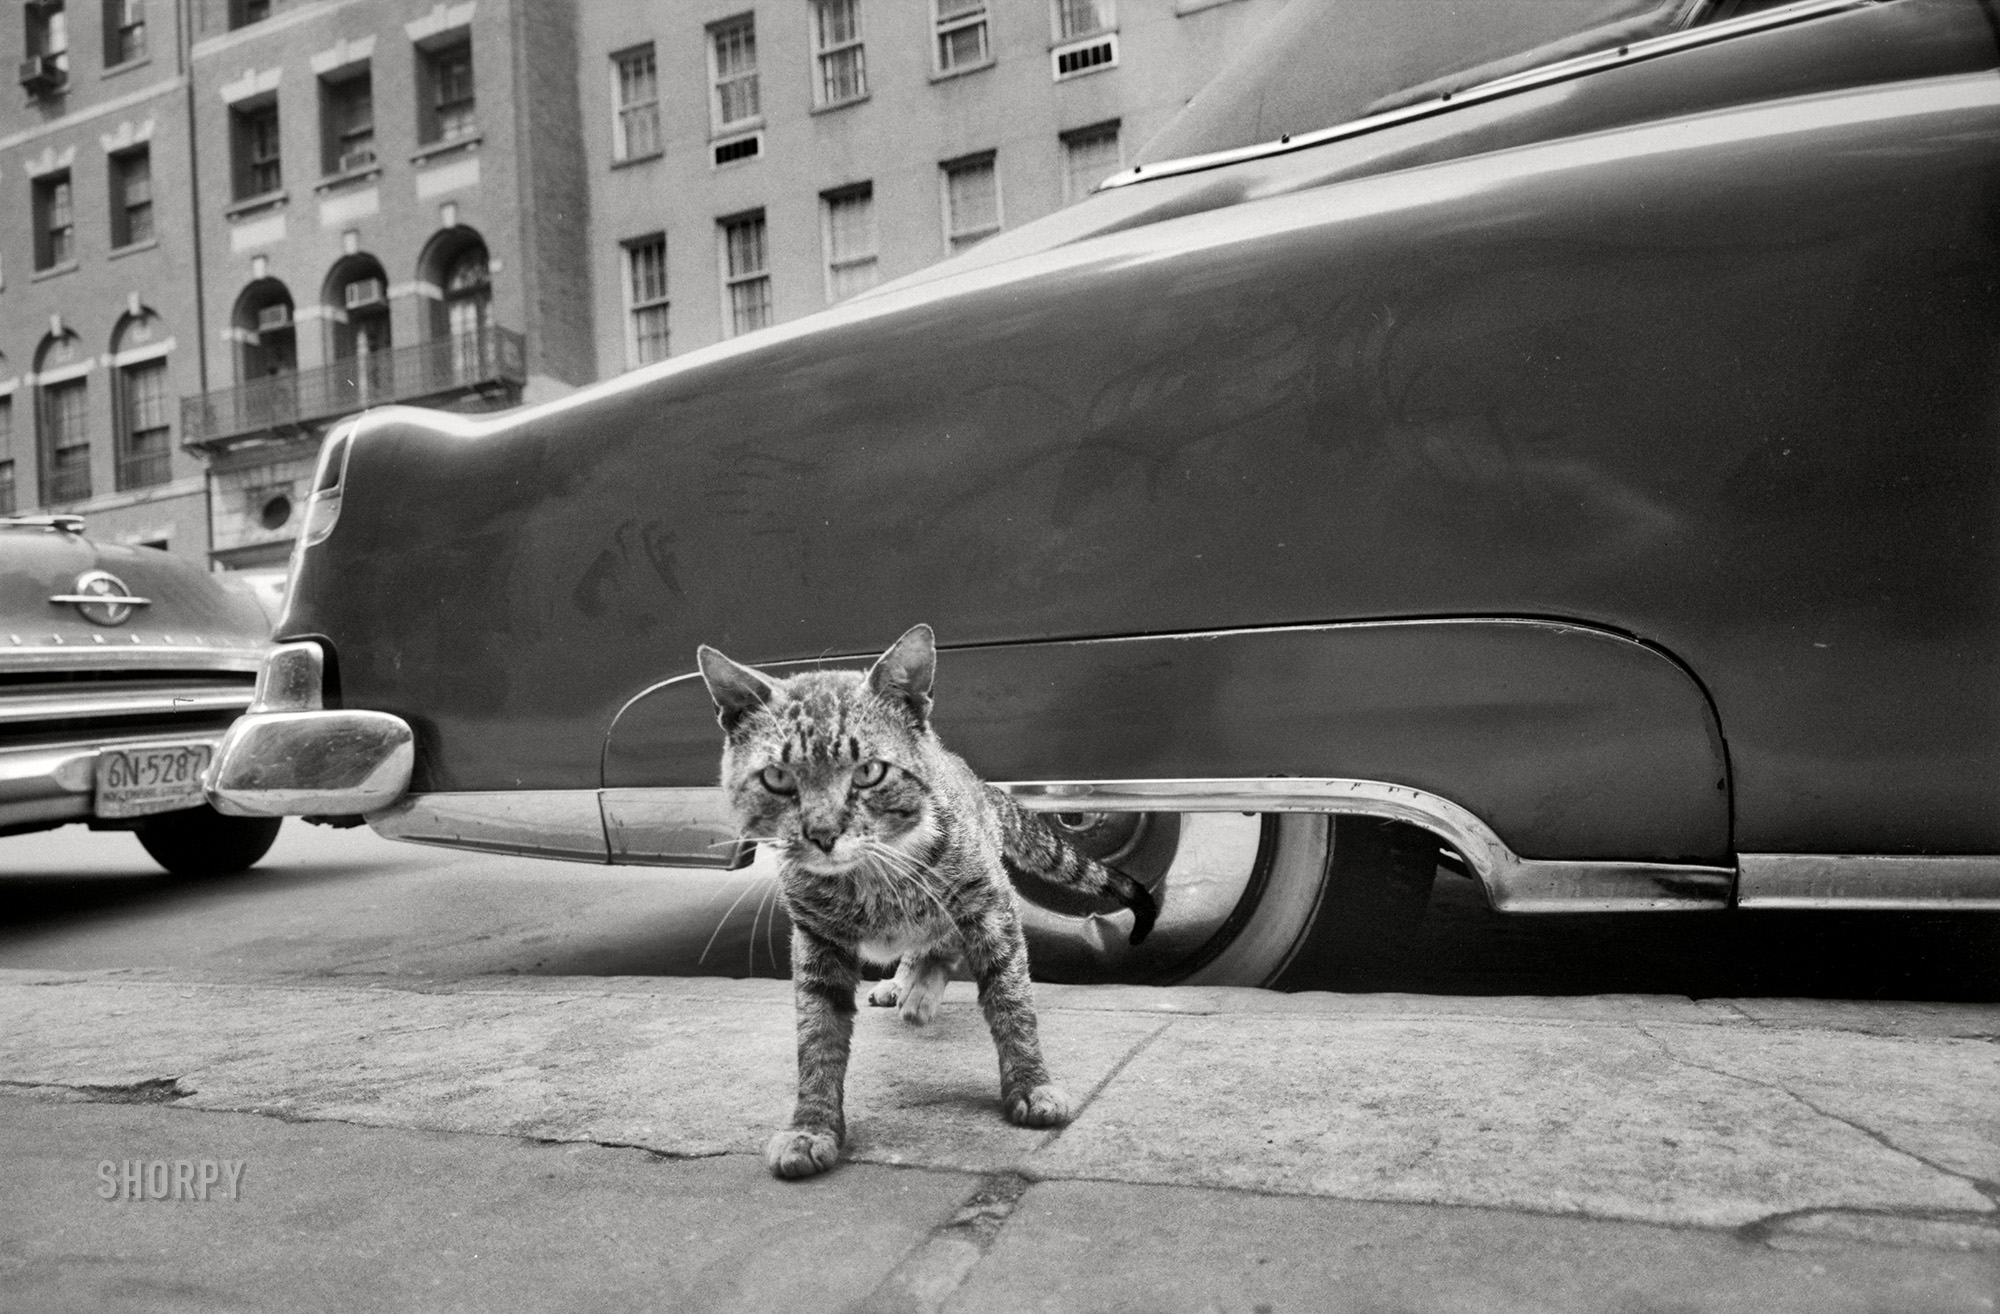 May 1959. New York. "Cat on sidewalk." 35mm negative by Angelo Rizzuto. View full size.